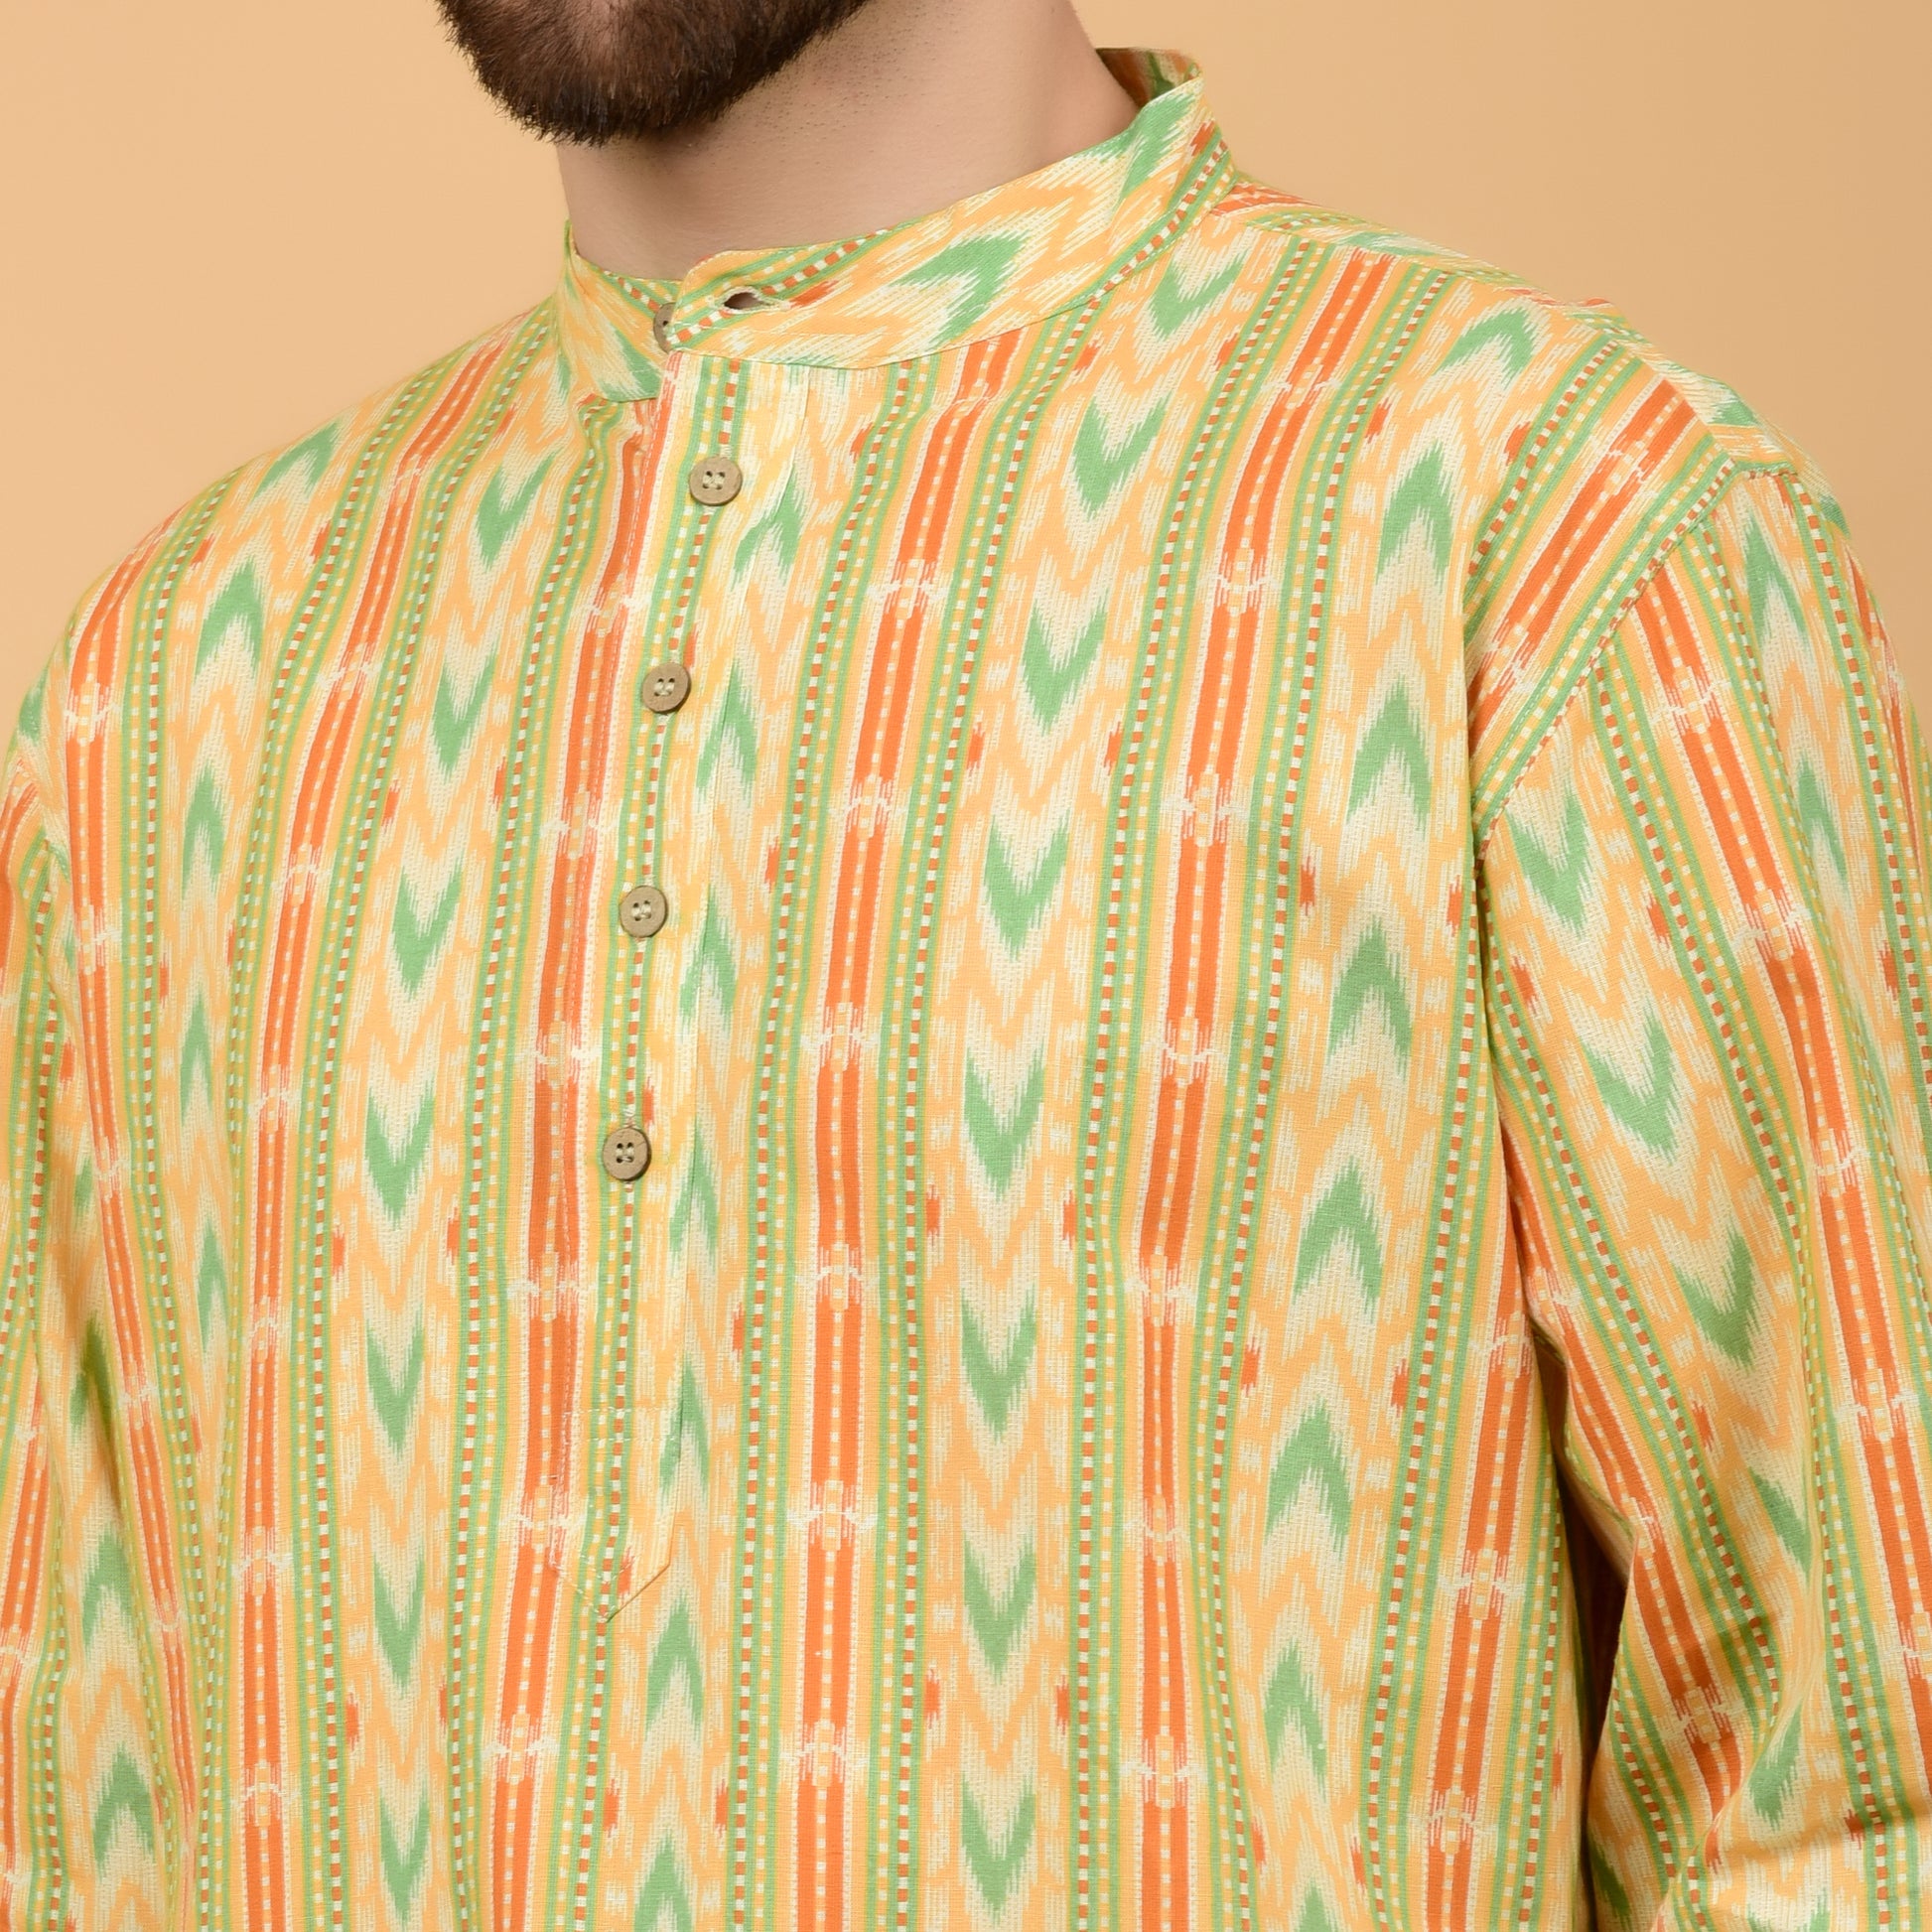 Yellow Abstract AOP Kurta ,Long Sleeve Mid Length, Band Collar,Sleeve With Cuffs, Side Pockets, Coconut Shell Buttons Relaxed Comfort Fit.Yellow Abstract AOP Kurta ,Long Sleeve Mid Length, Band Collar,Sleeve With Cuffs, Side Pockets, Coconut Shell Buttons Relaxed Comfort Fit.